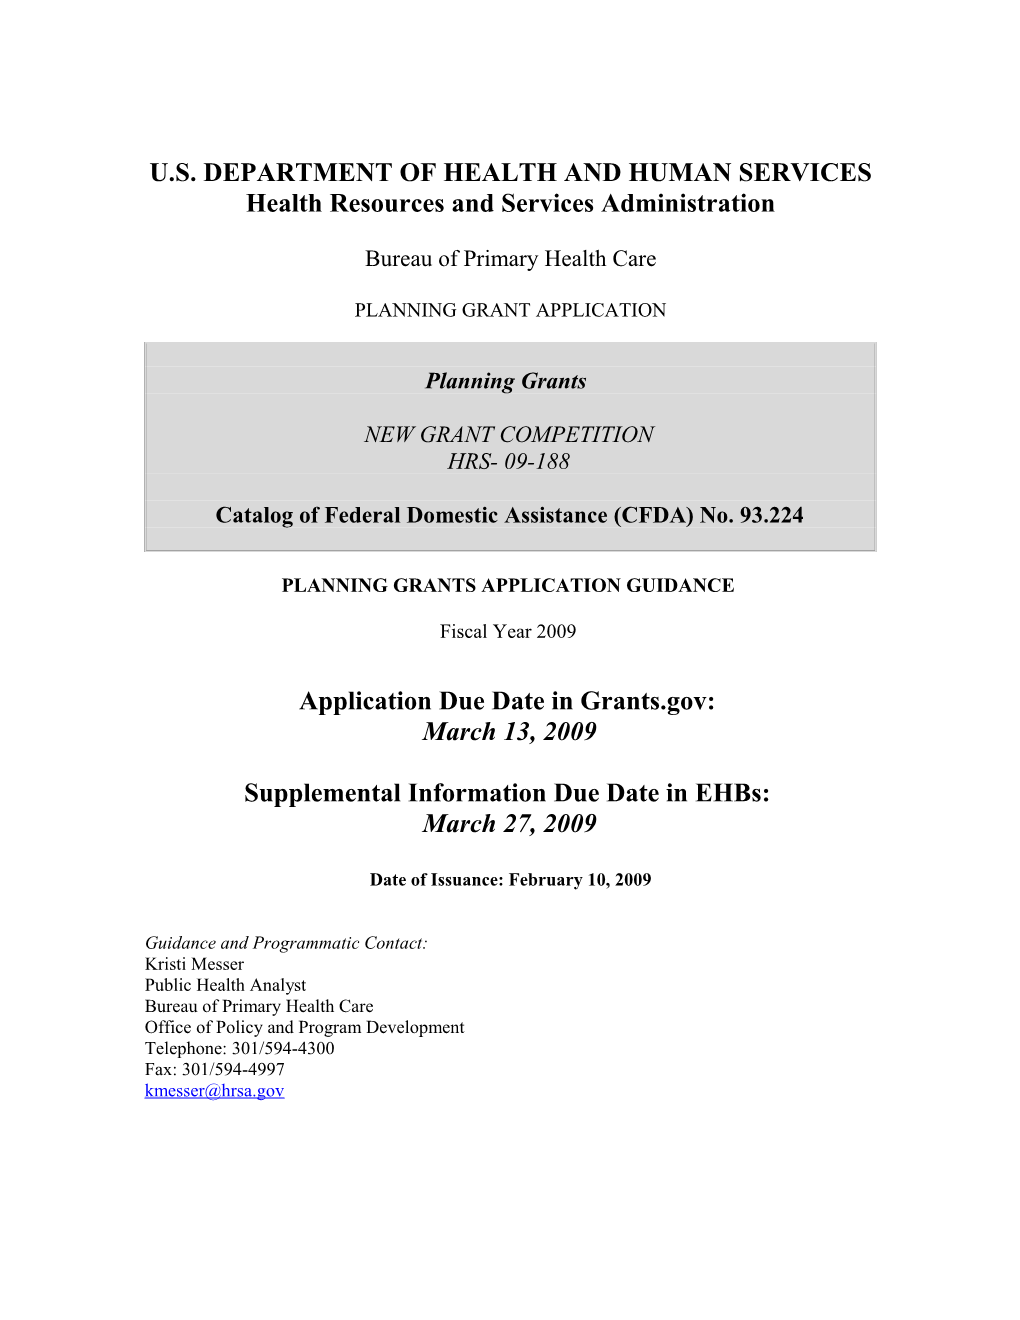 U.S. Department of Health and Human Services s15